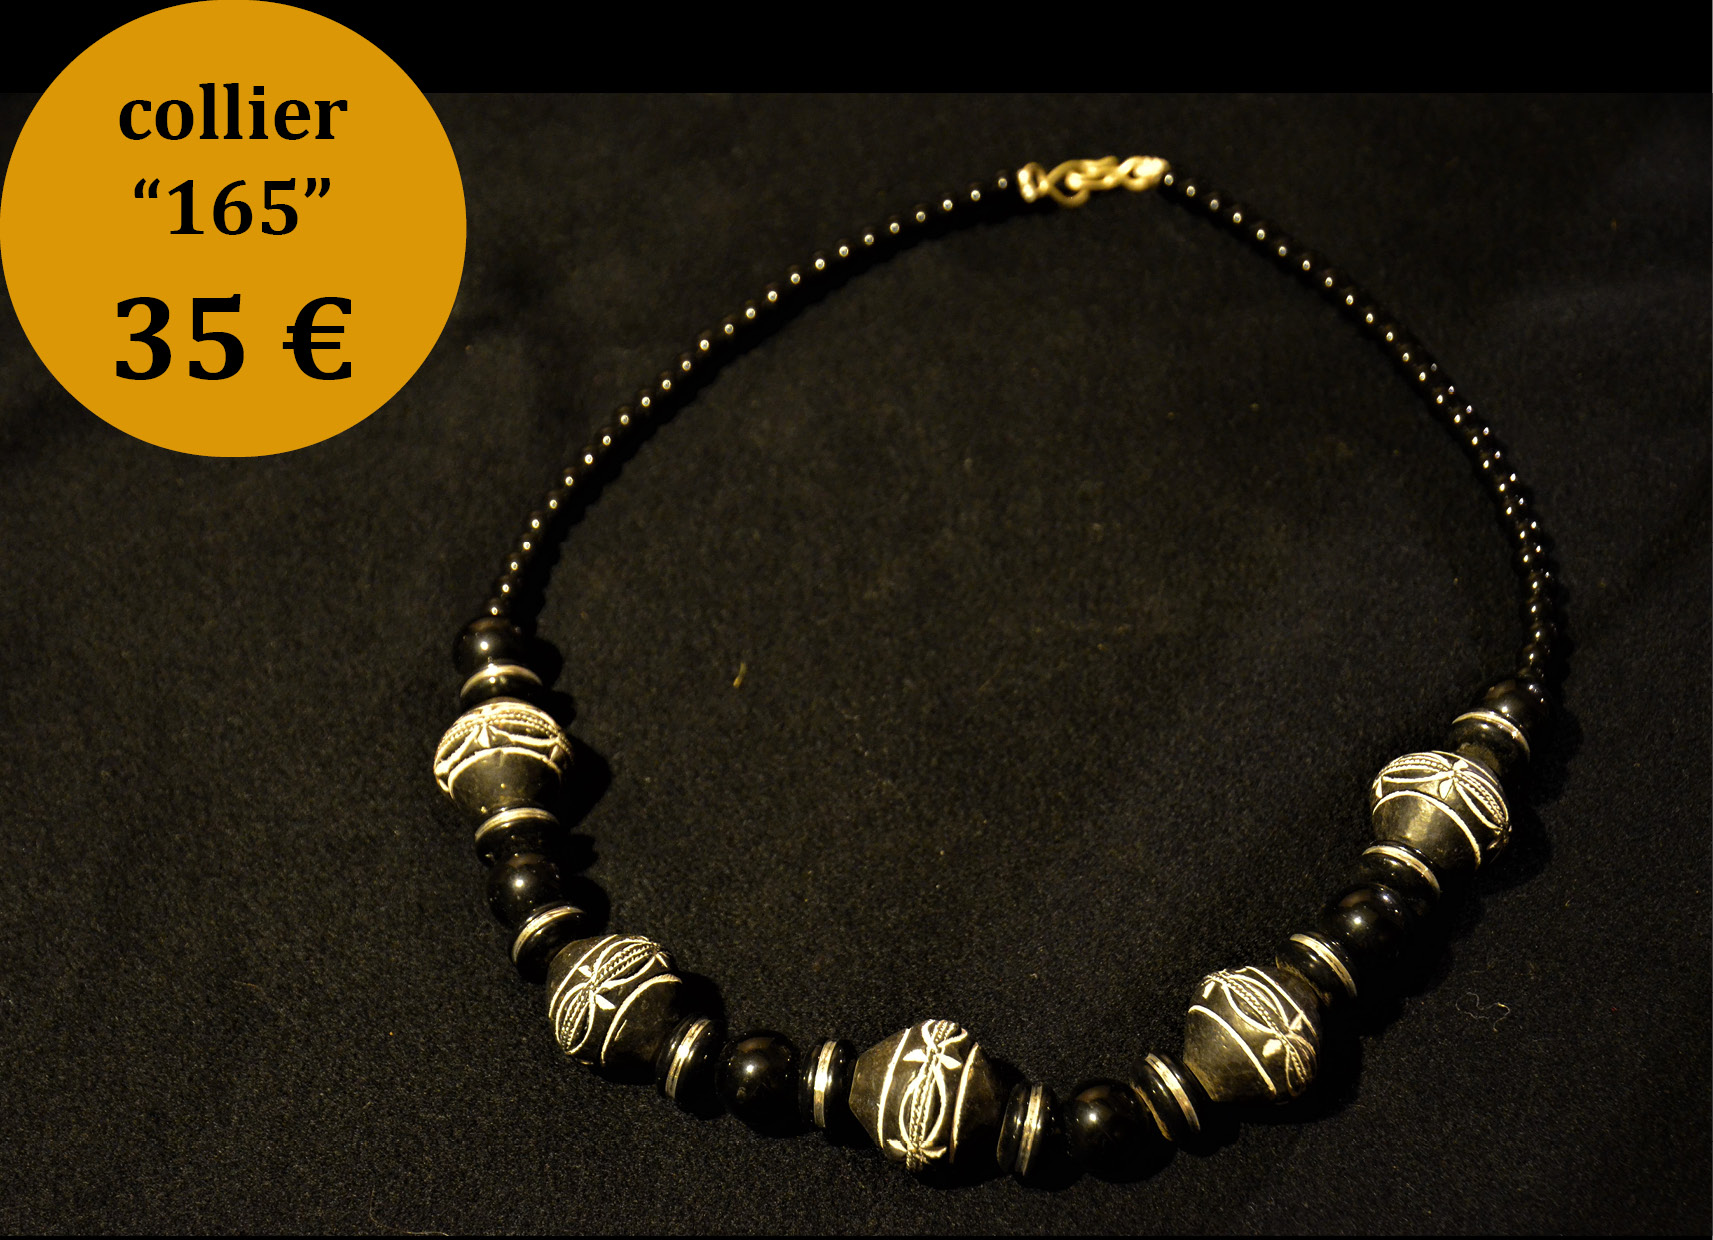 Collier "165"